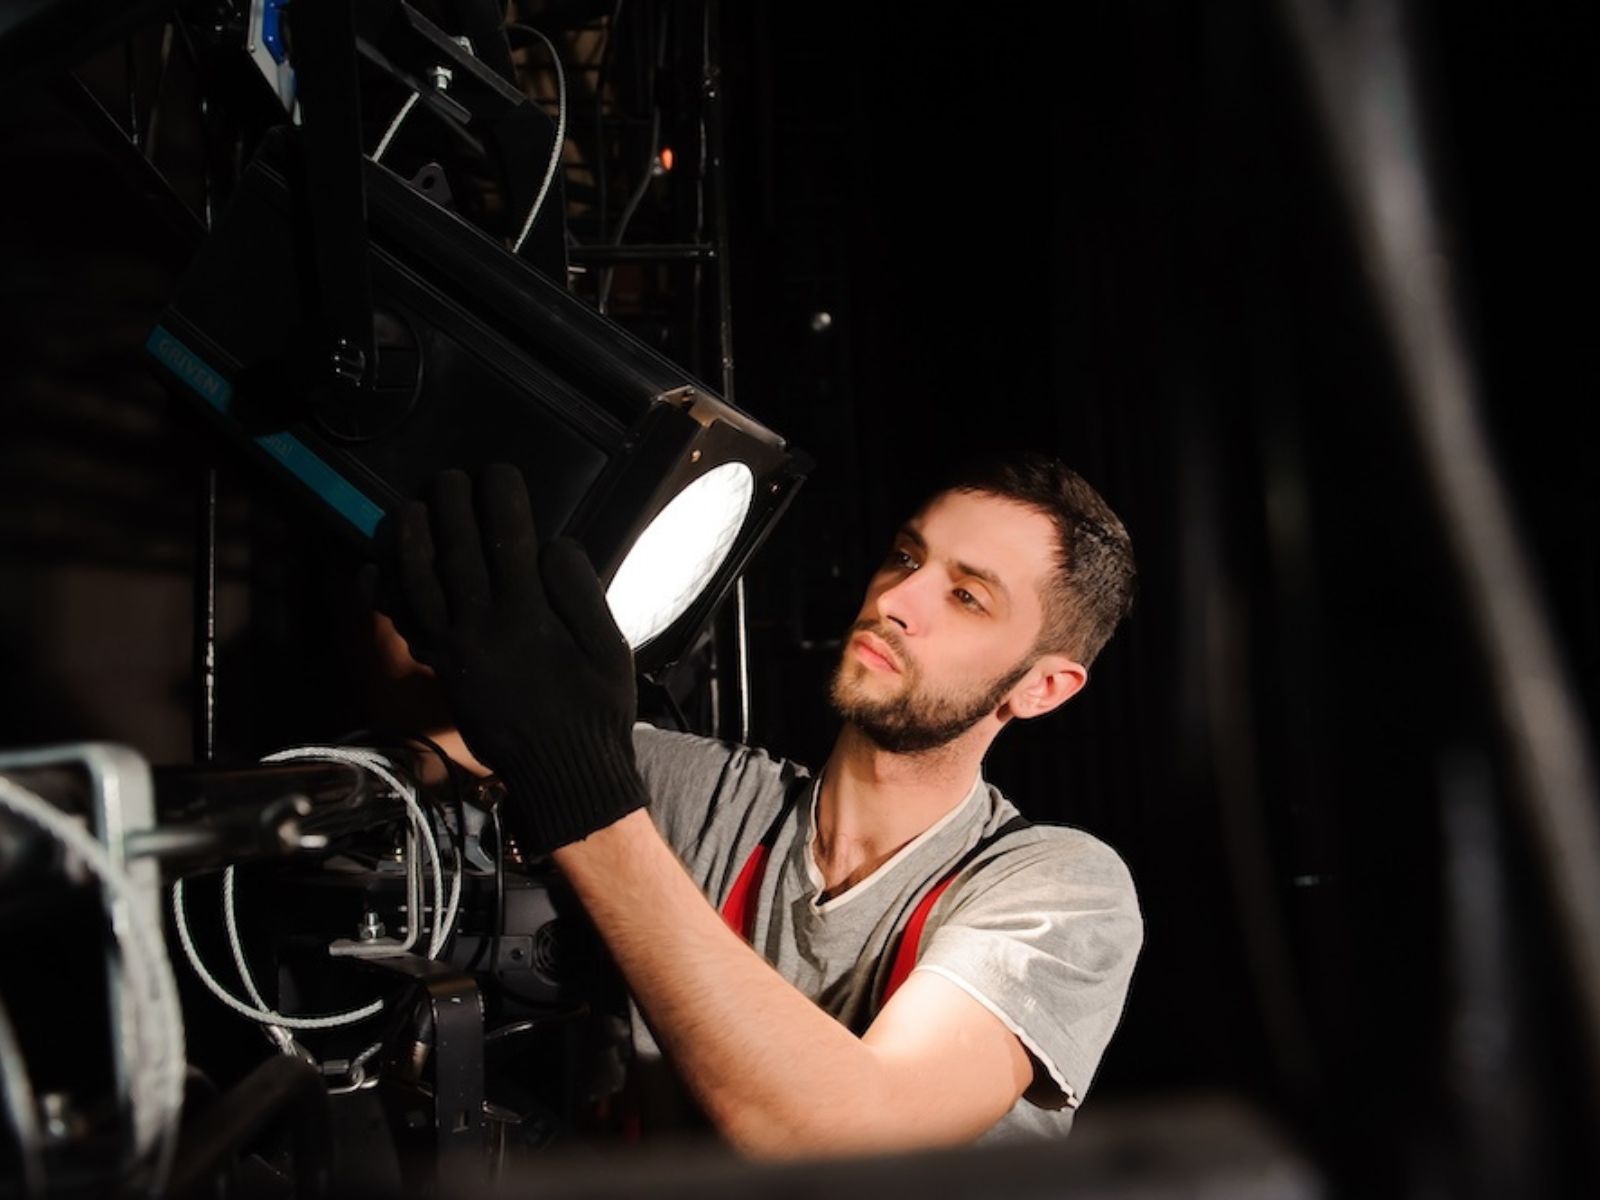 A man adjusting a studio light, wearing gloves and a headset, with rigging equipment in the background.